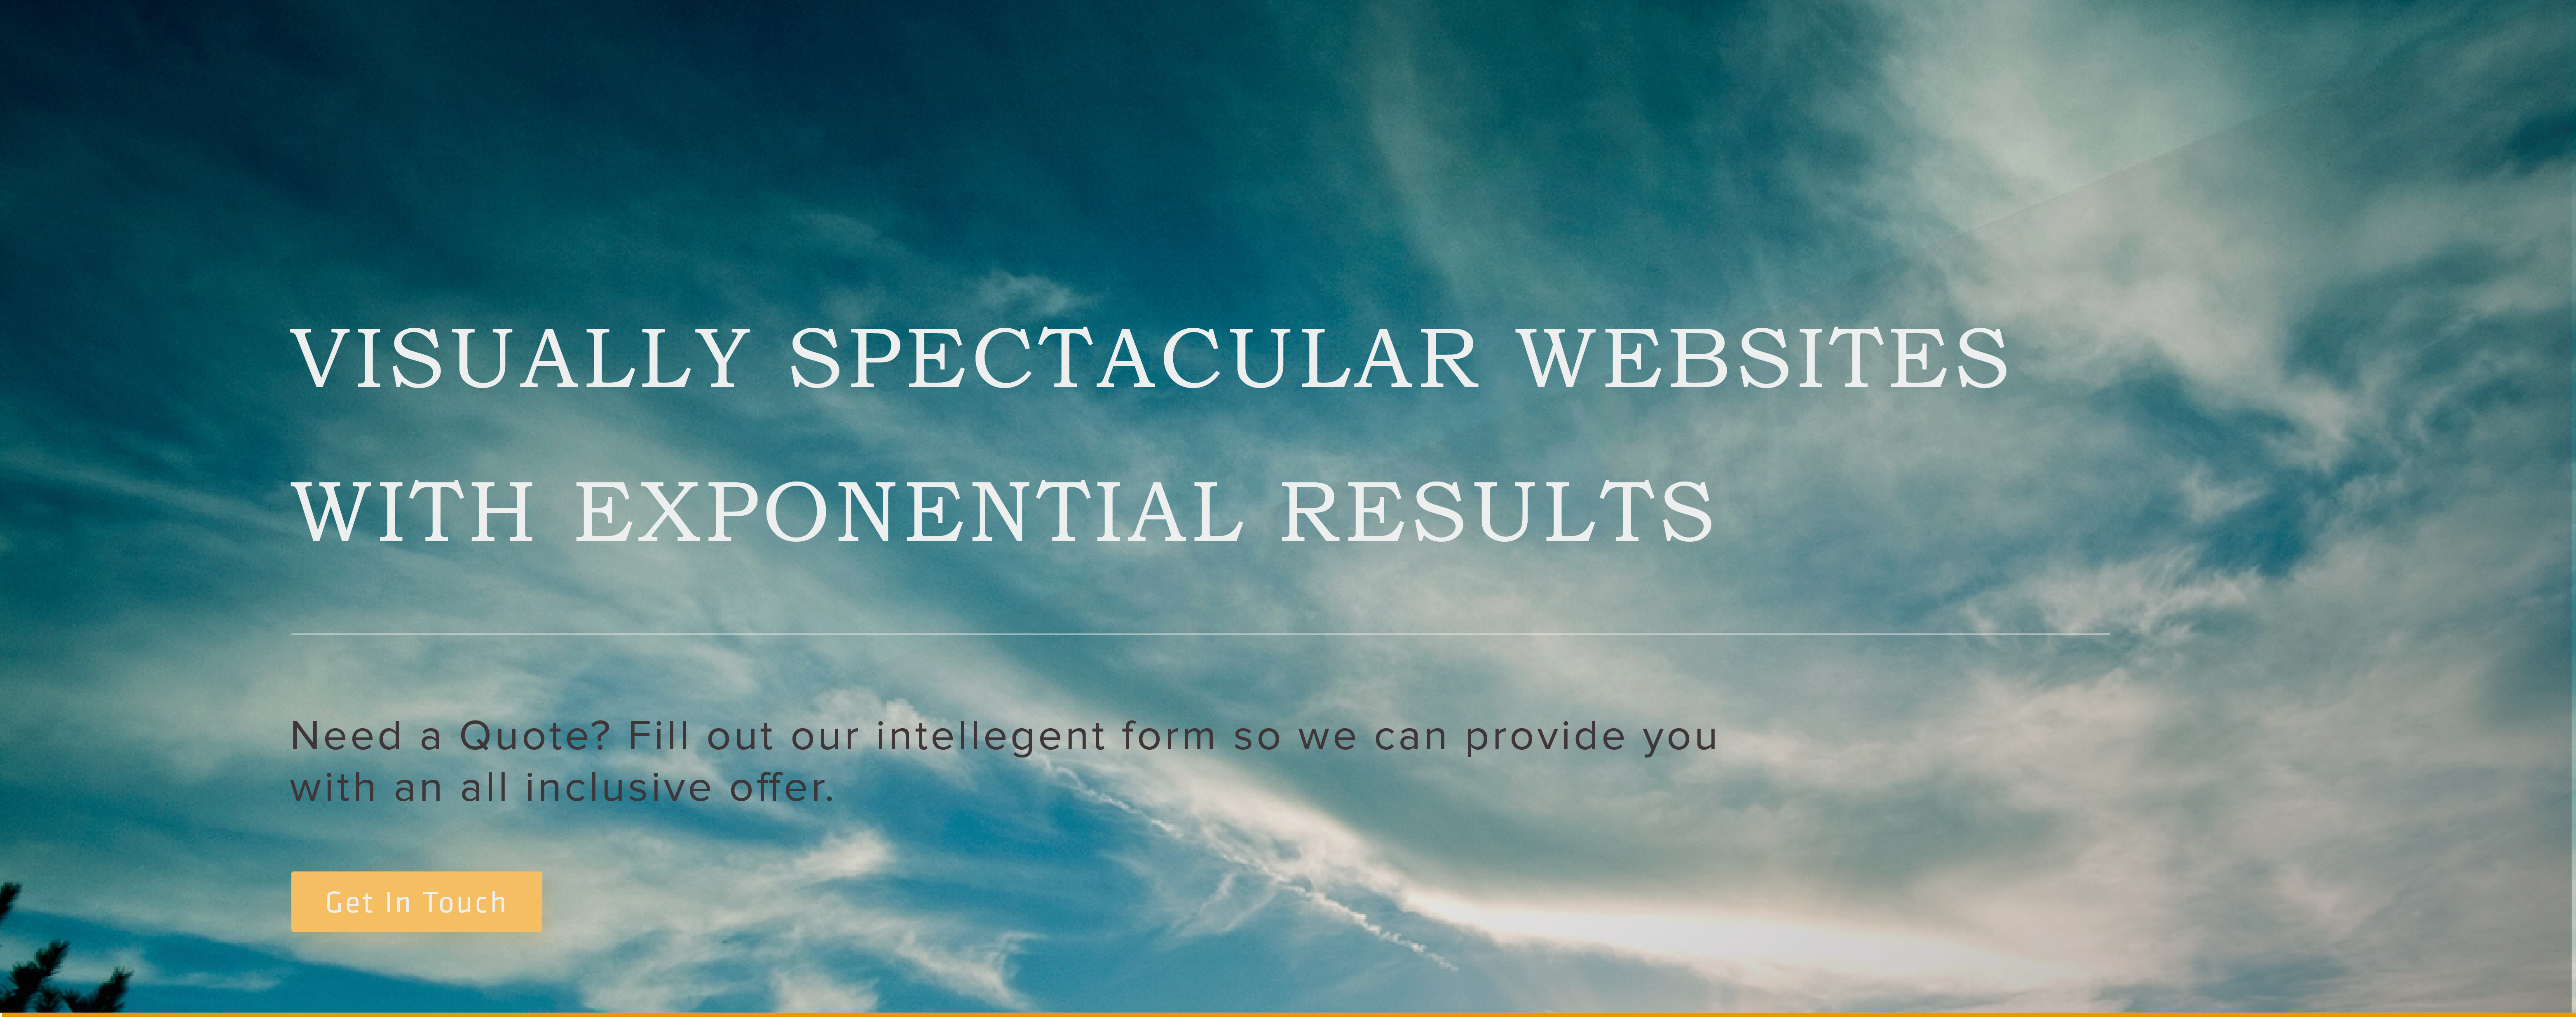 Visually Spectacular Websites With Exponential Results